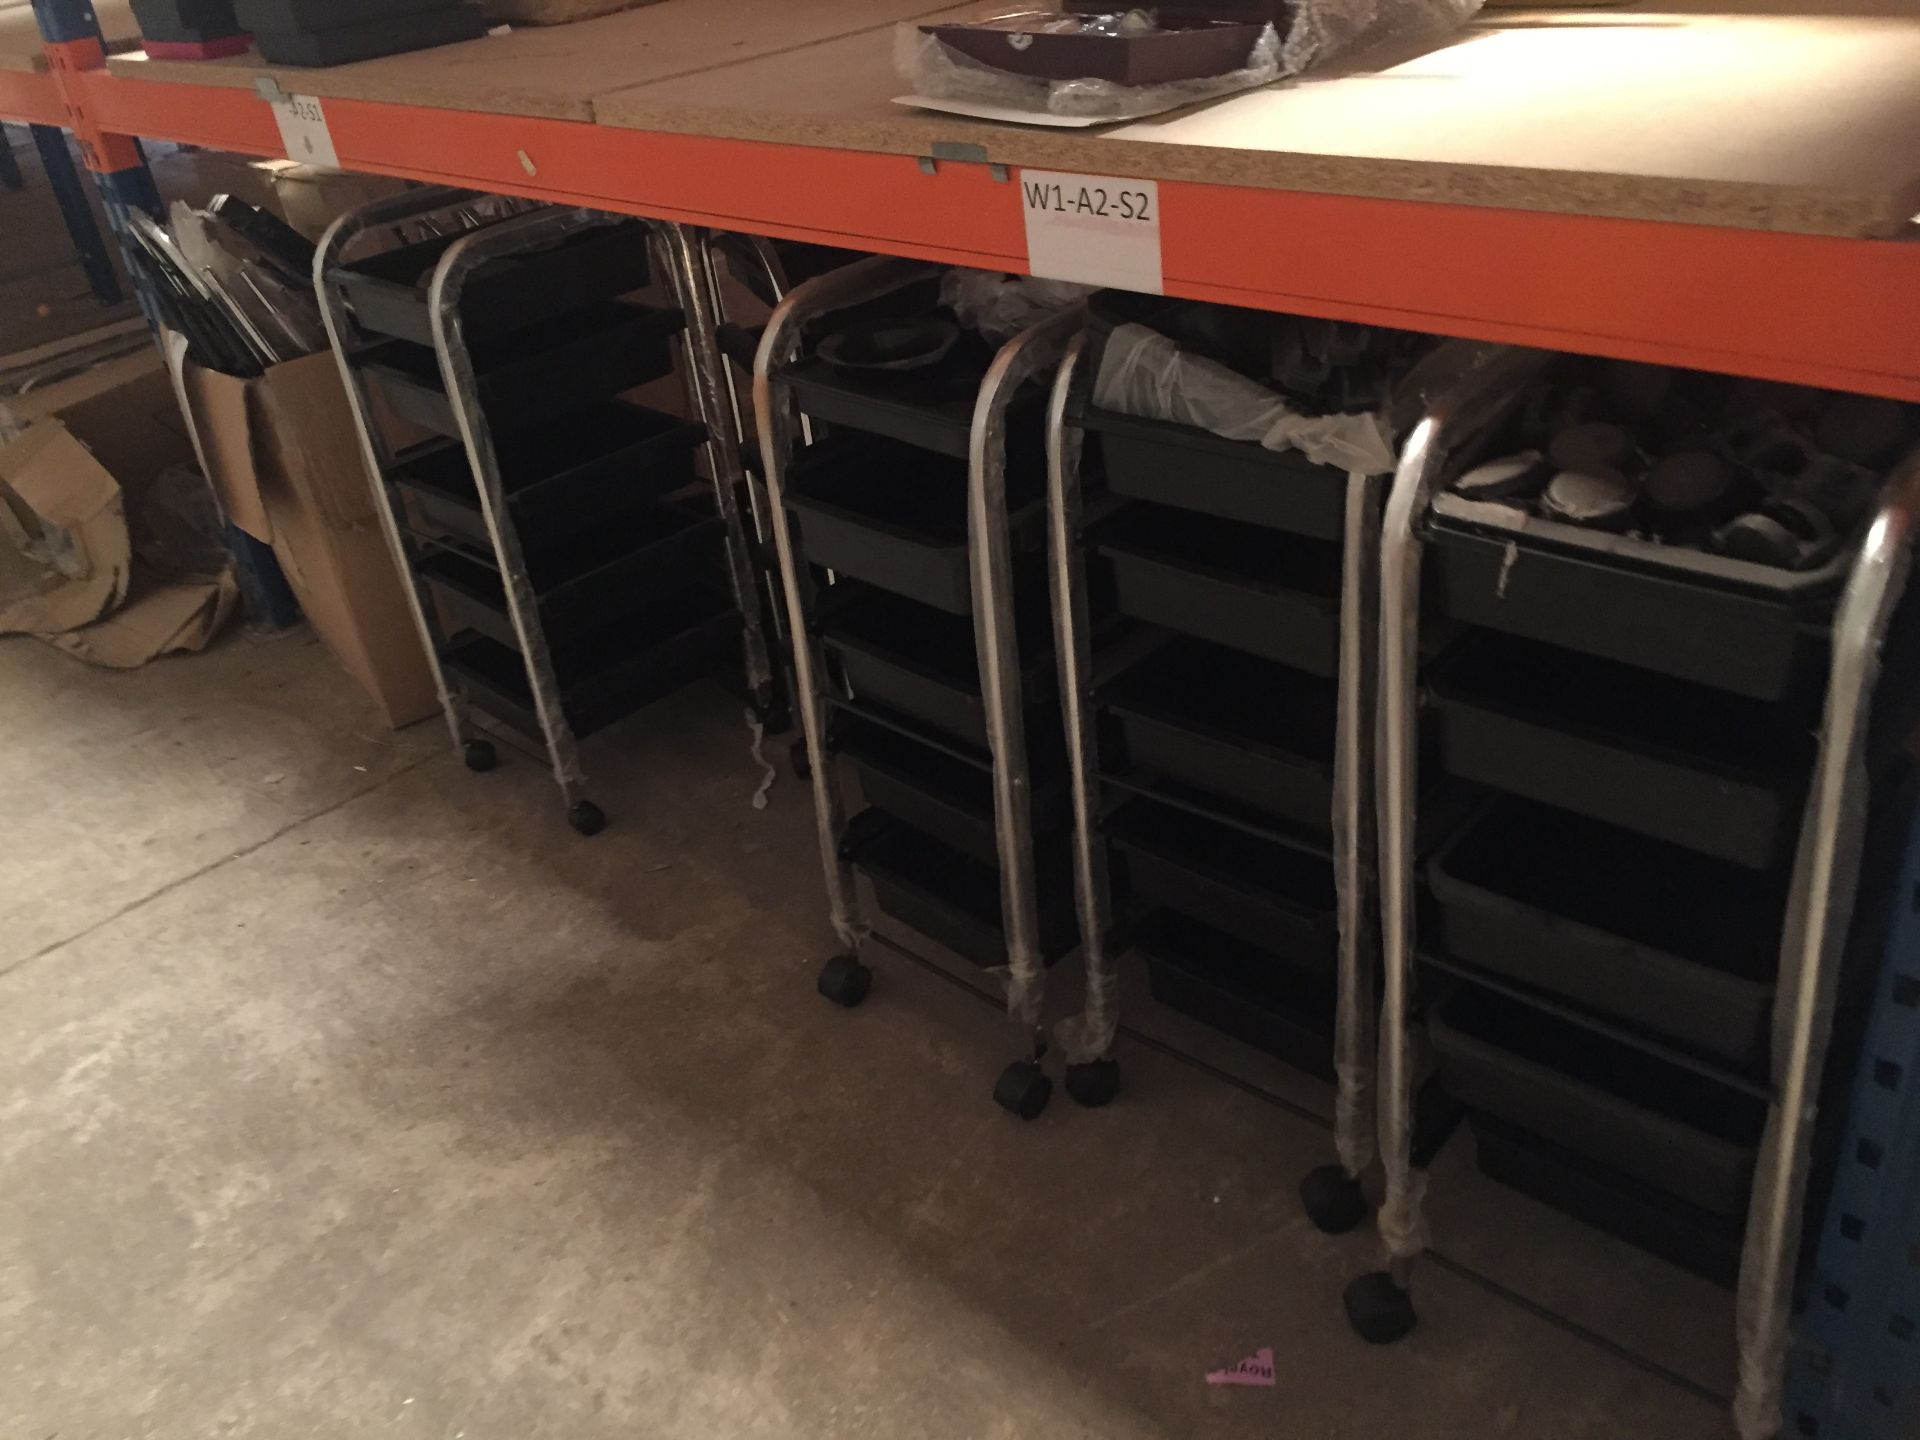 5 Hairdresser Trolleys. Please see photos. All sizes and quantities are approx.